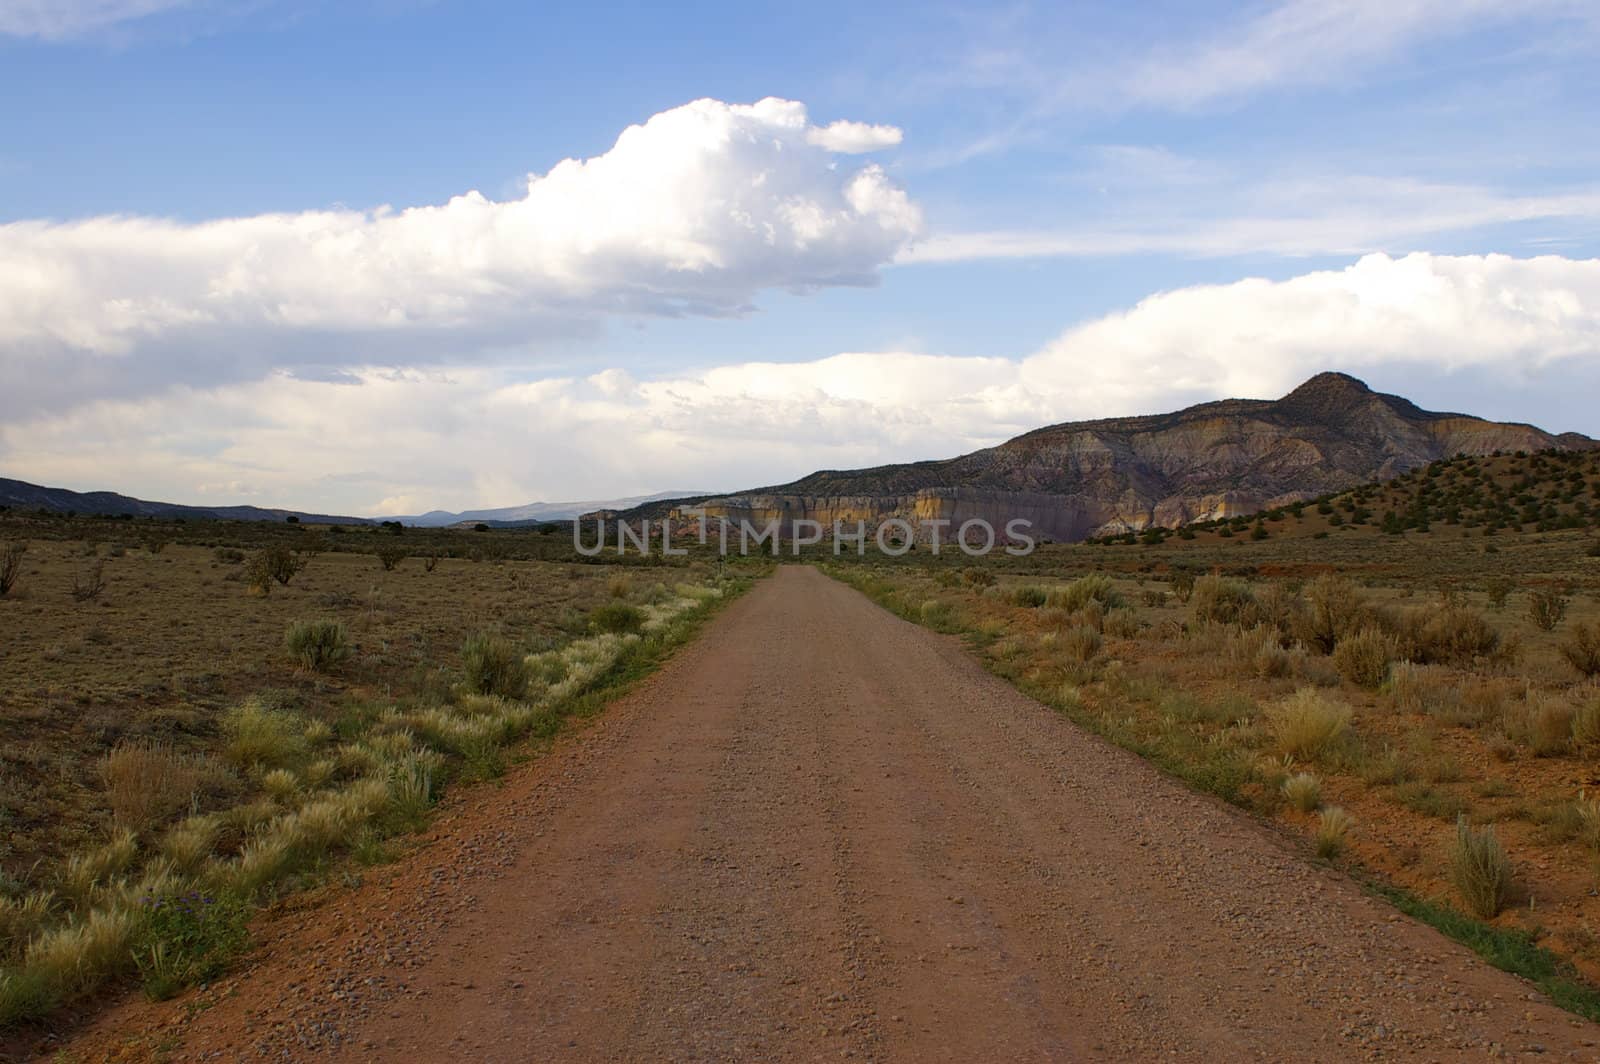 Endlessly long straight red dirt road heading towards mountains and a blue sky ahead with brush and desert plants either side - with copy space.